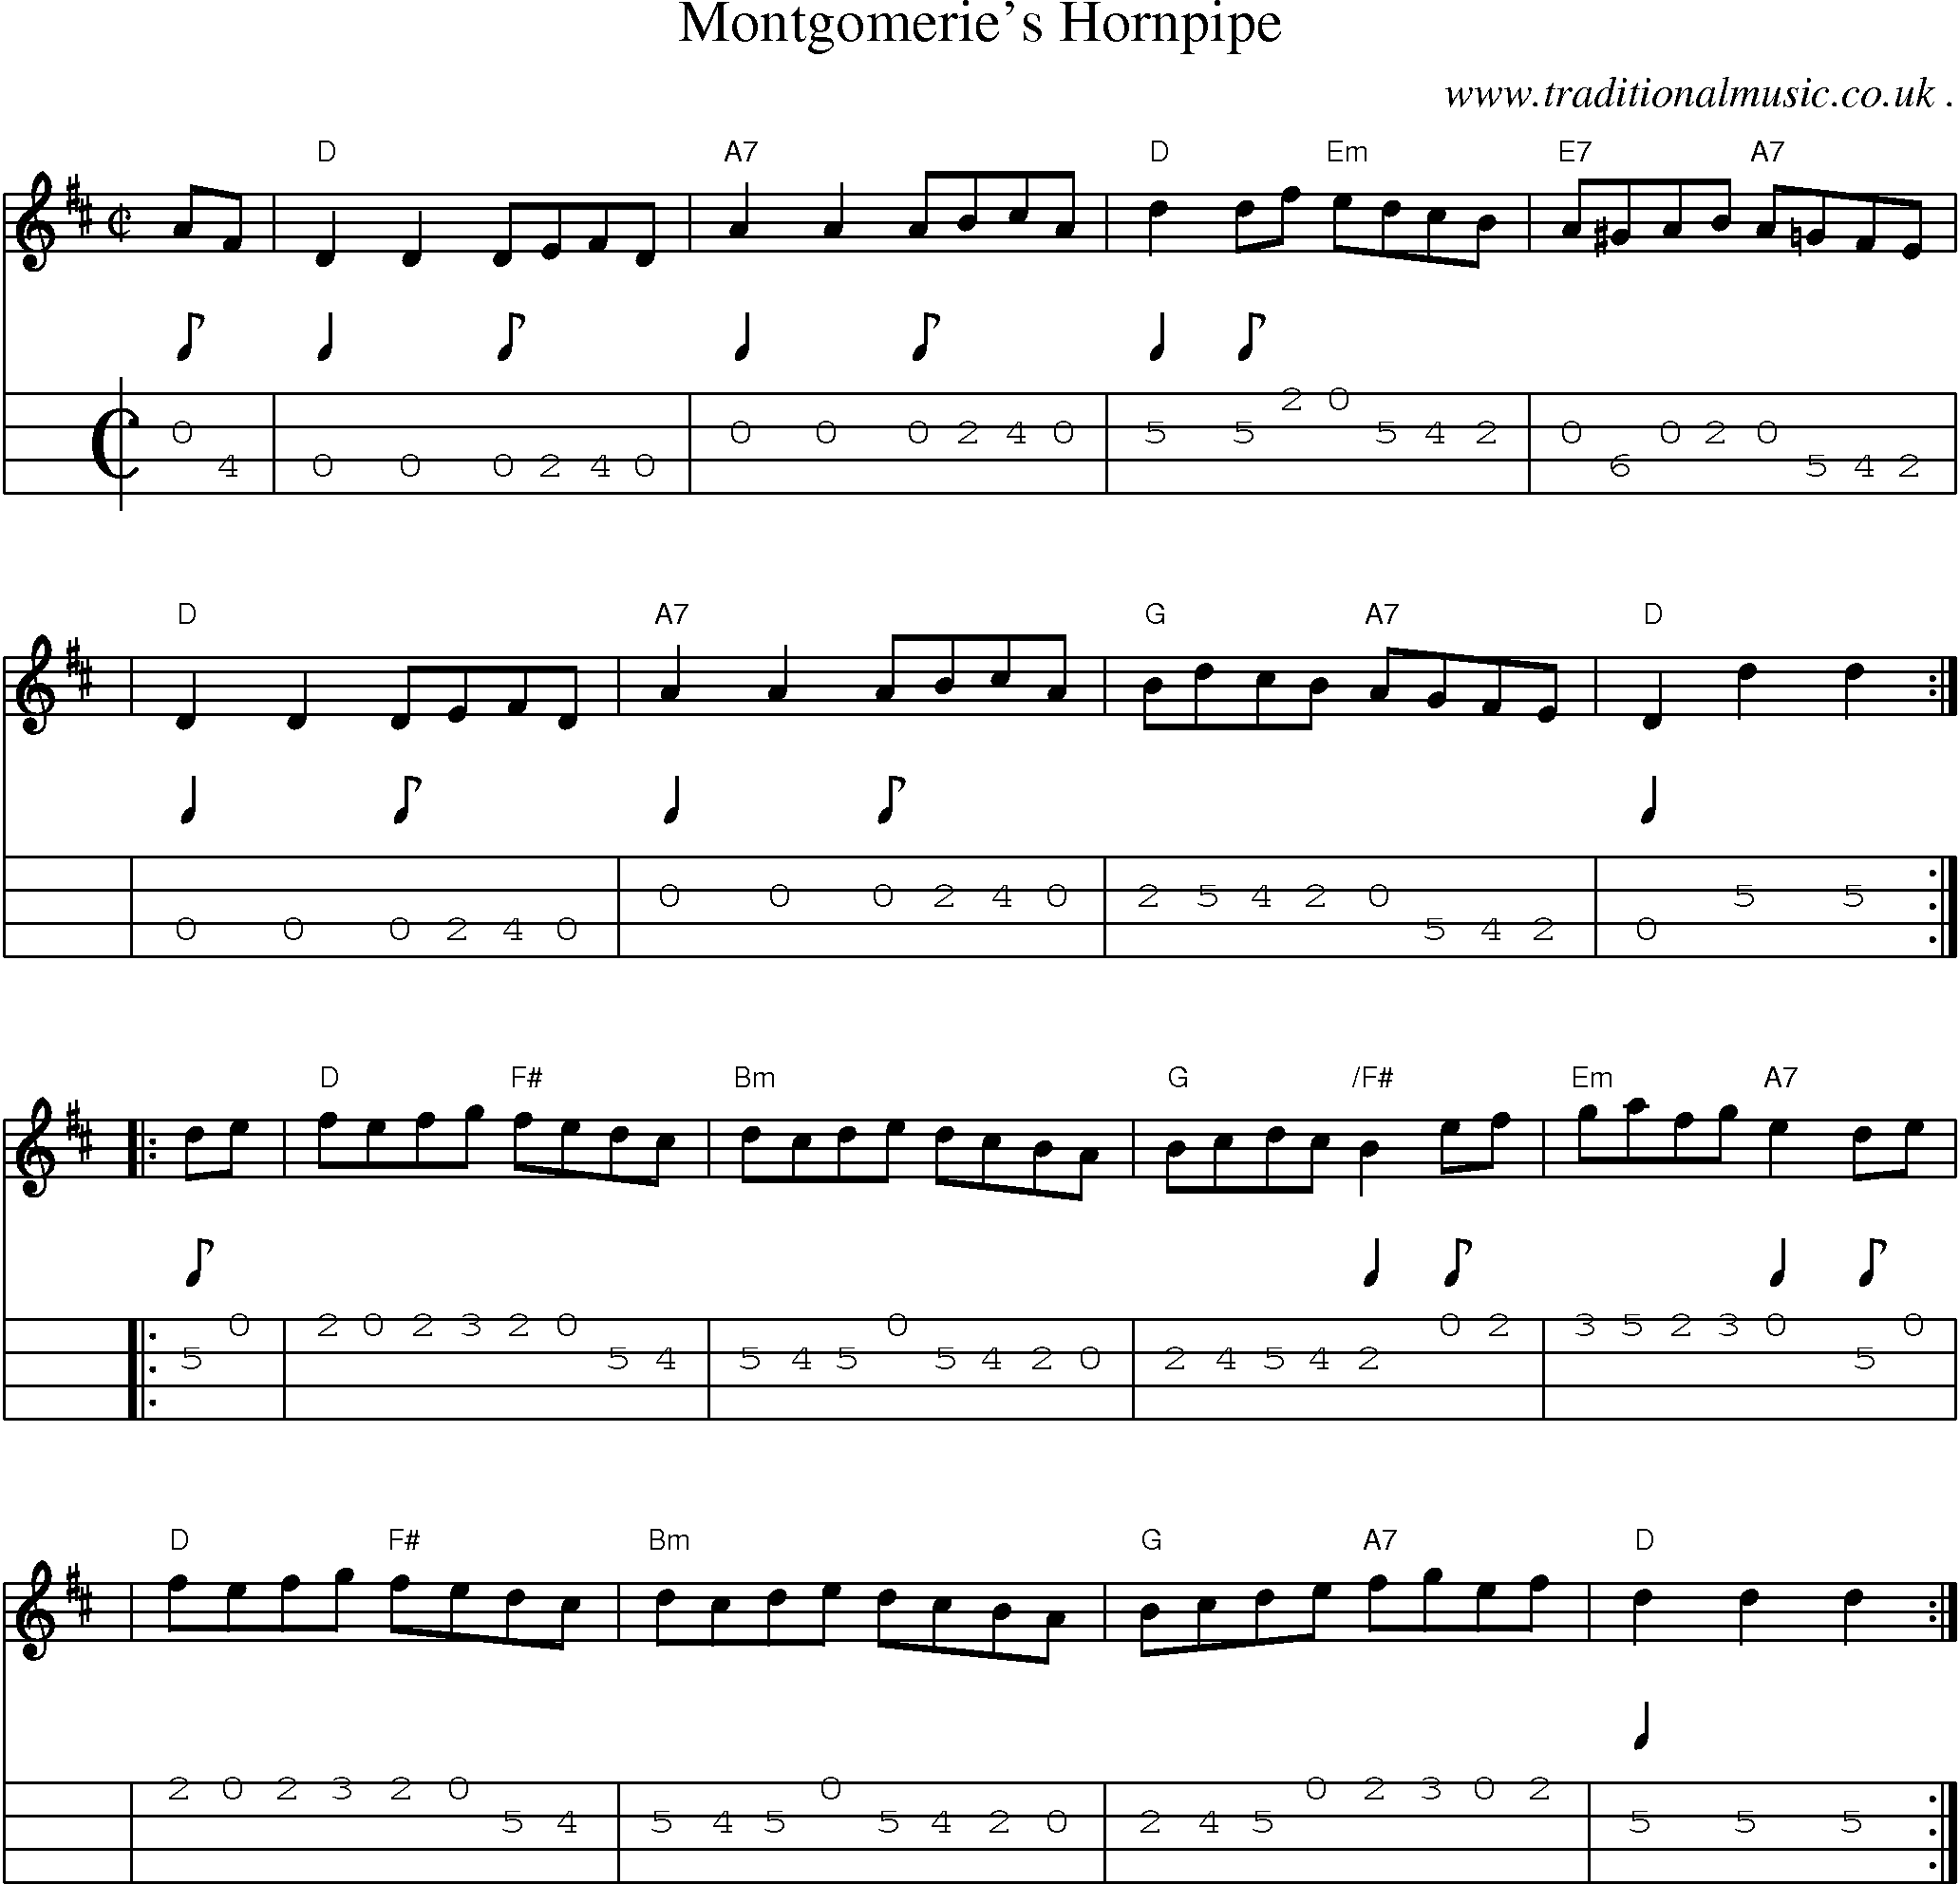 Sheet-music  score, Chords and Mandolin Tabs for Montgomeries Hornpipe